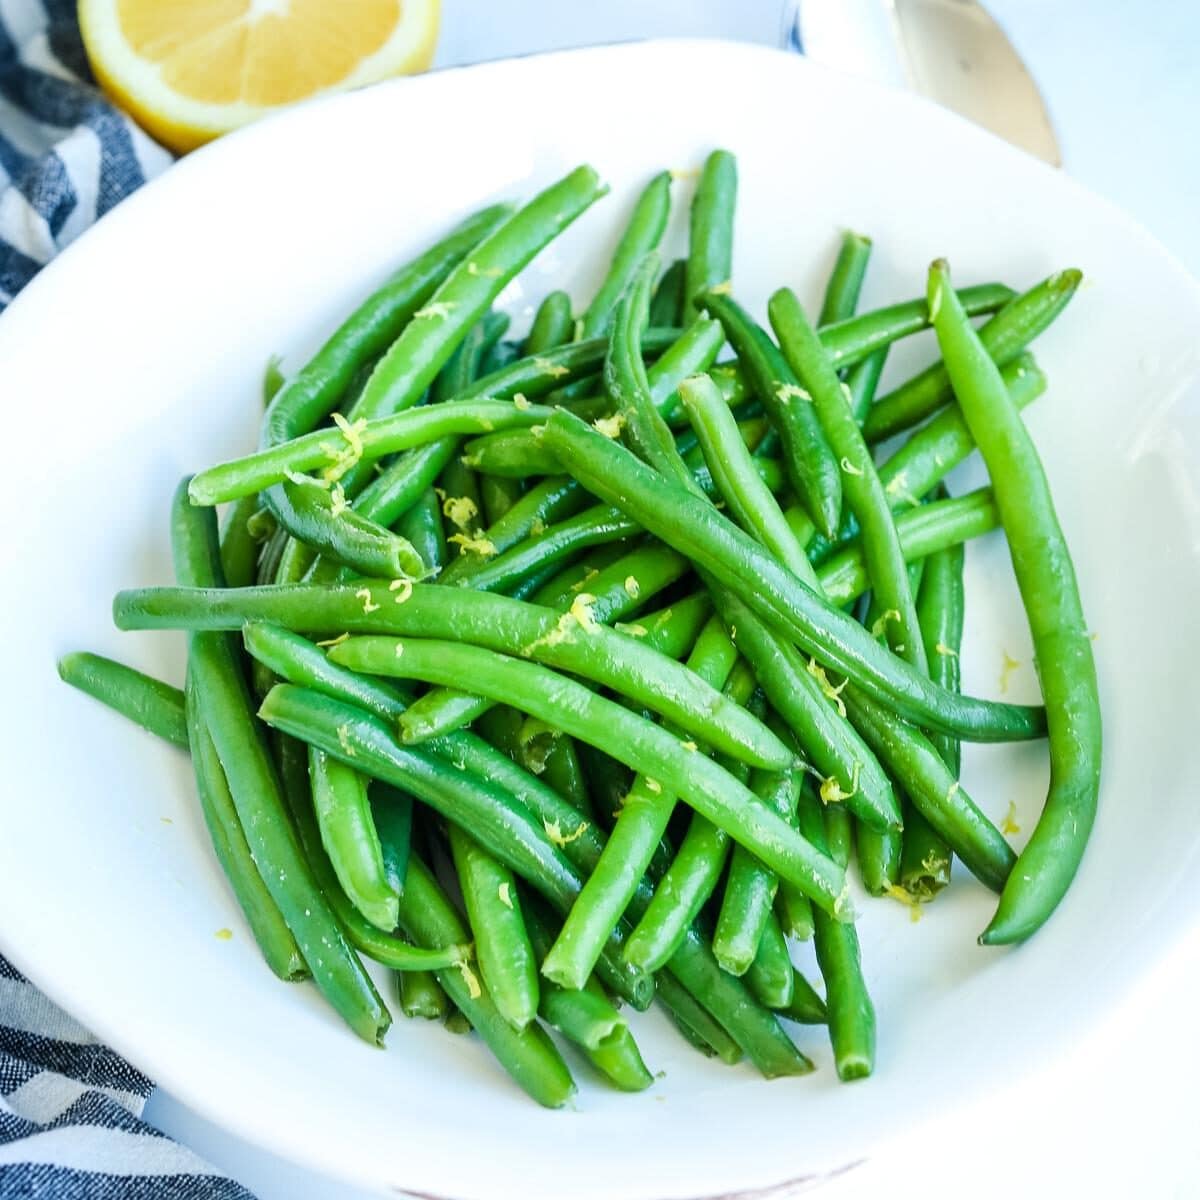 Plate of green beans topped with lemon zest.